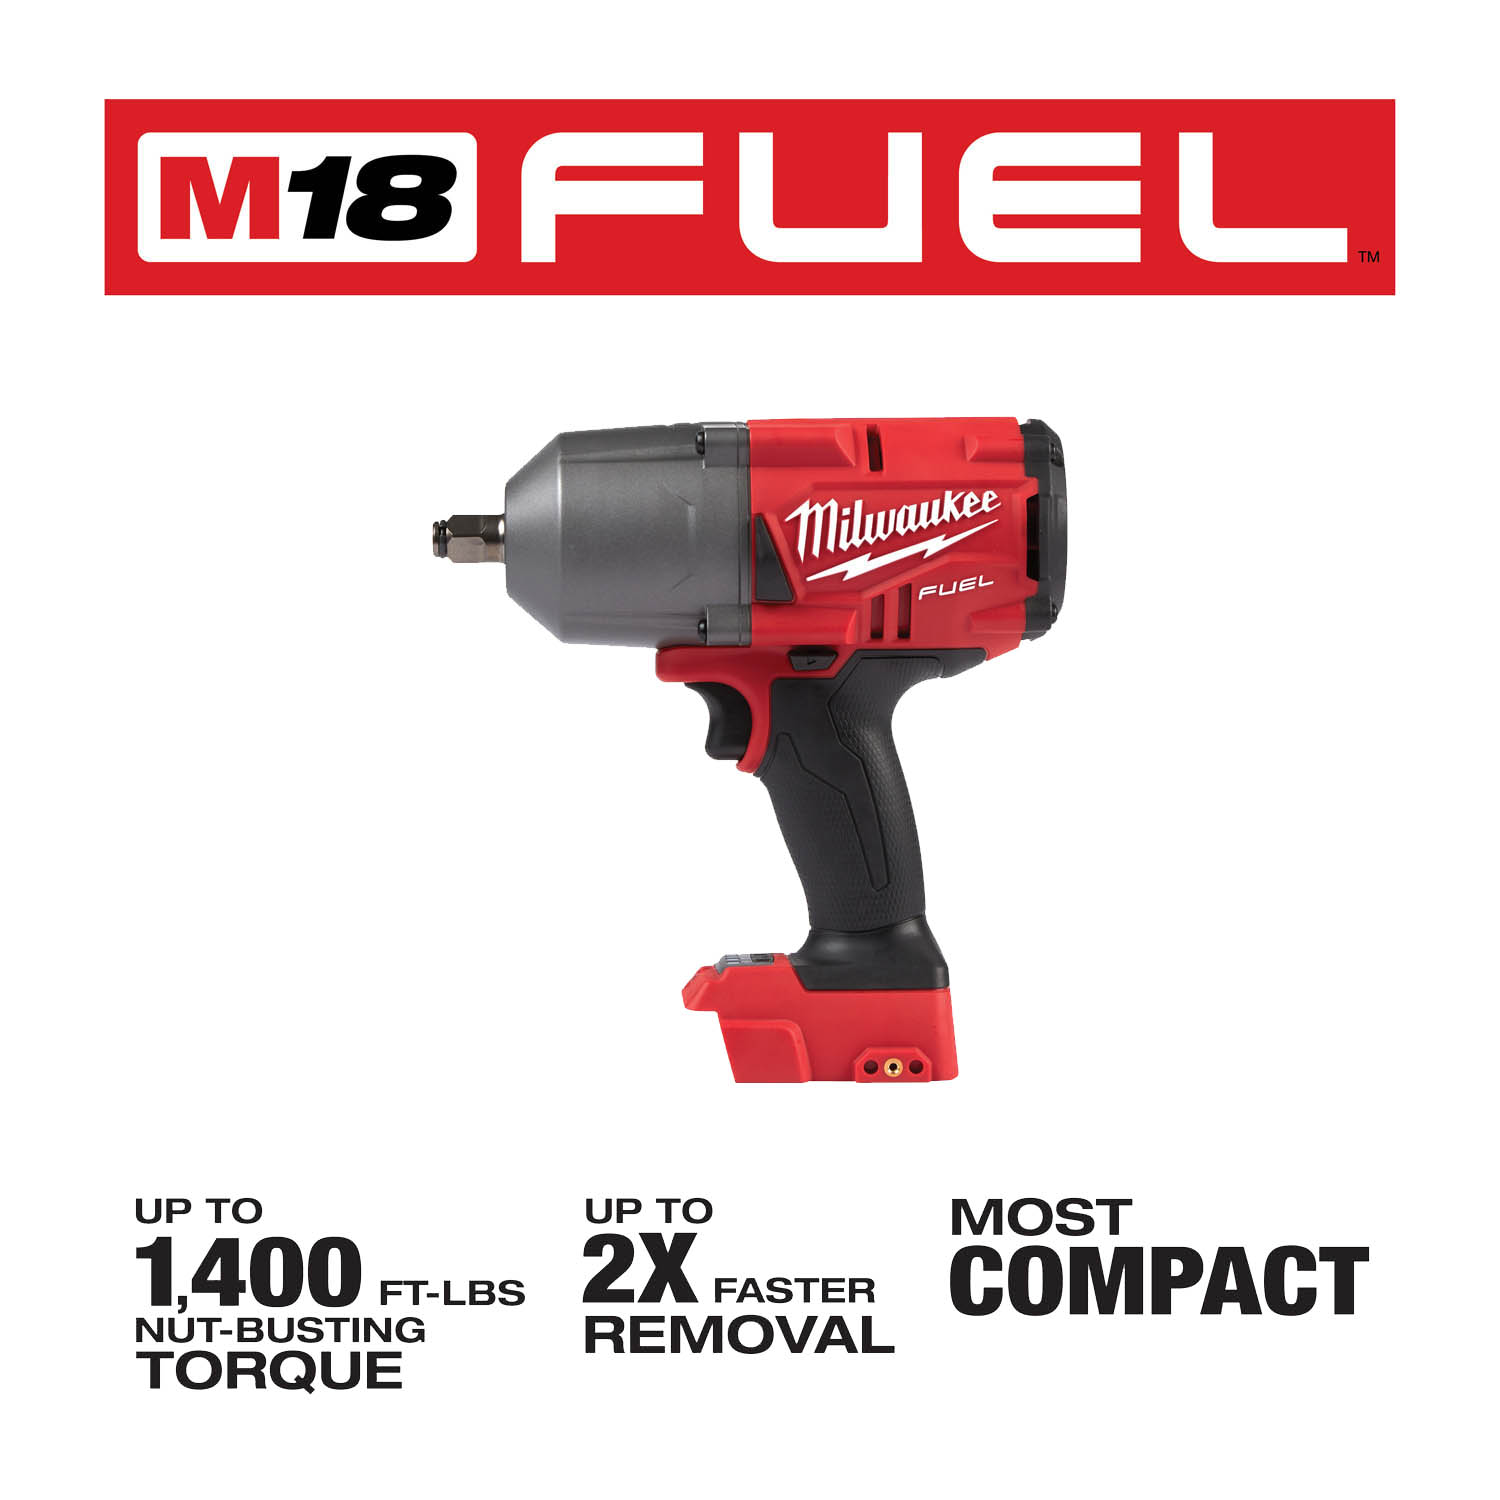 M18 FUEL 1/2 INCH HIGH TORQUE IMPACT WRENCH WITH FRICTION RING (TOOL ONLY)